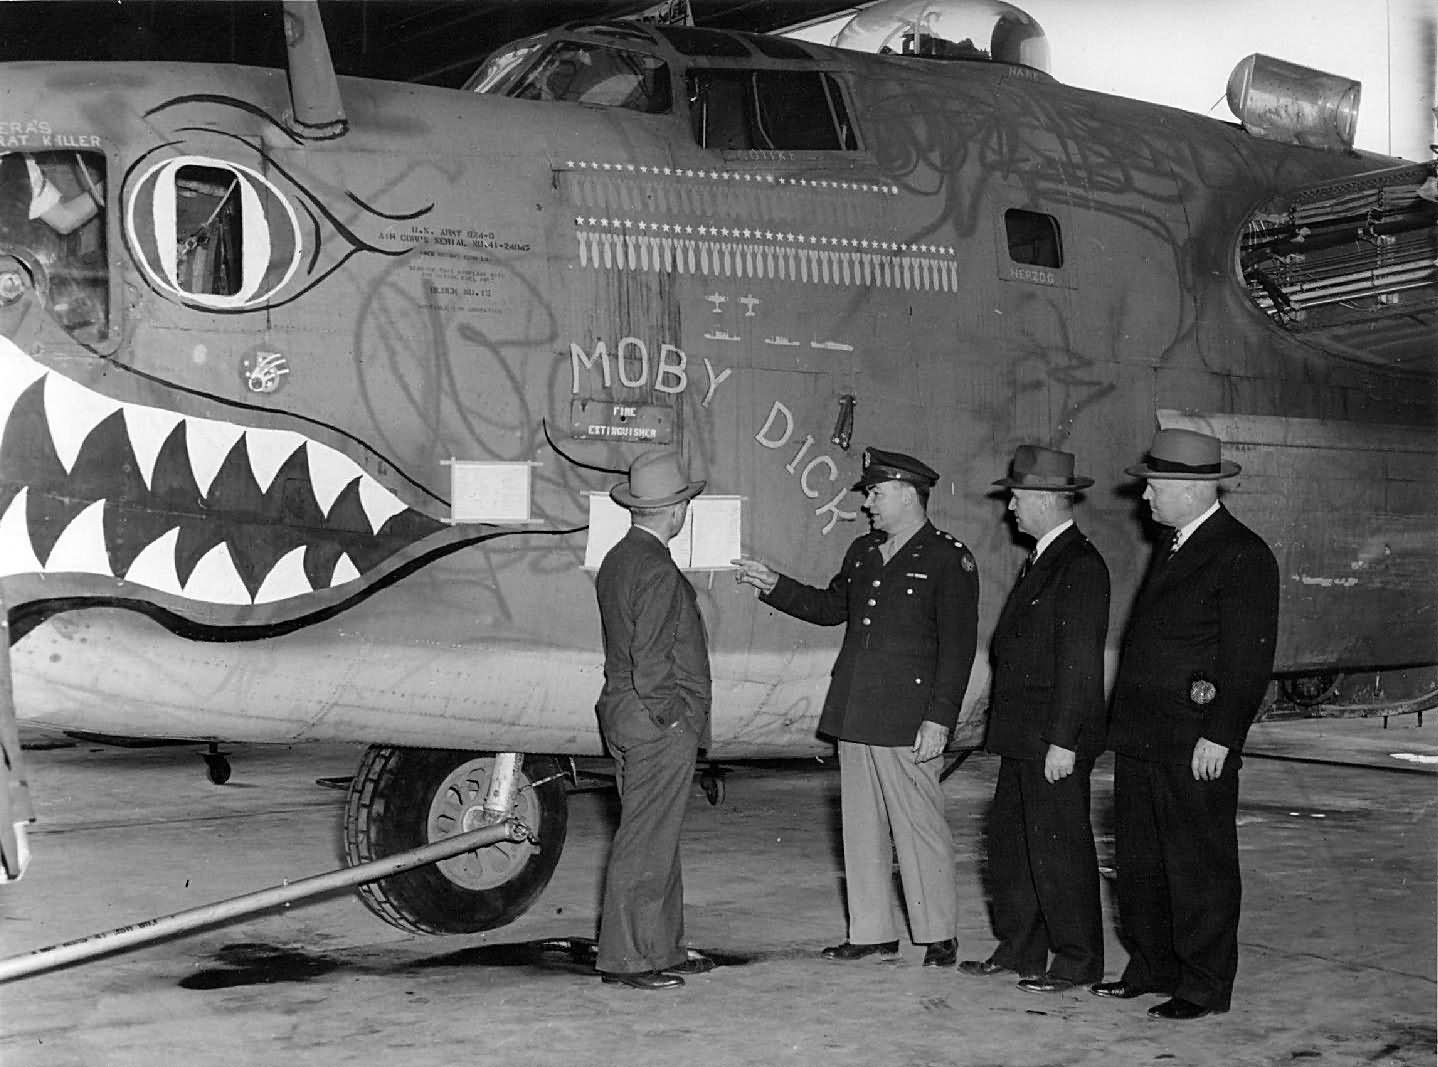 B-24D Liberator serial 41-24047 Nose Art "Moby Dick" from 90th Bo...